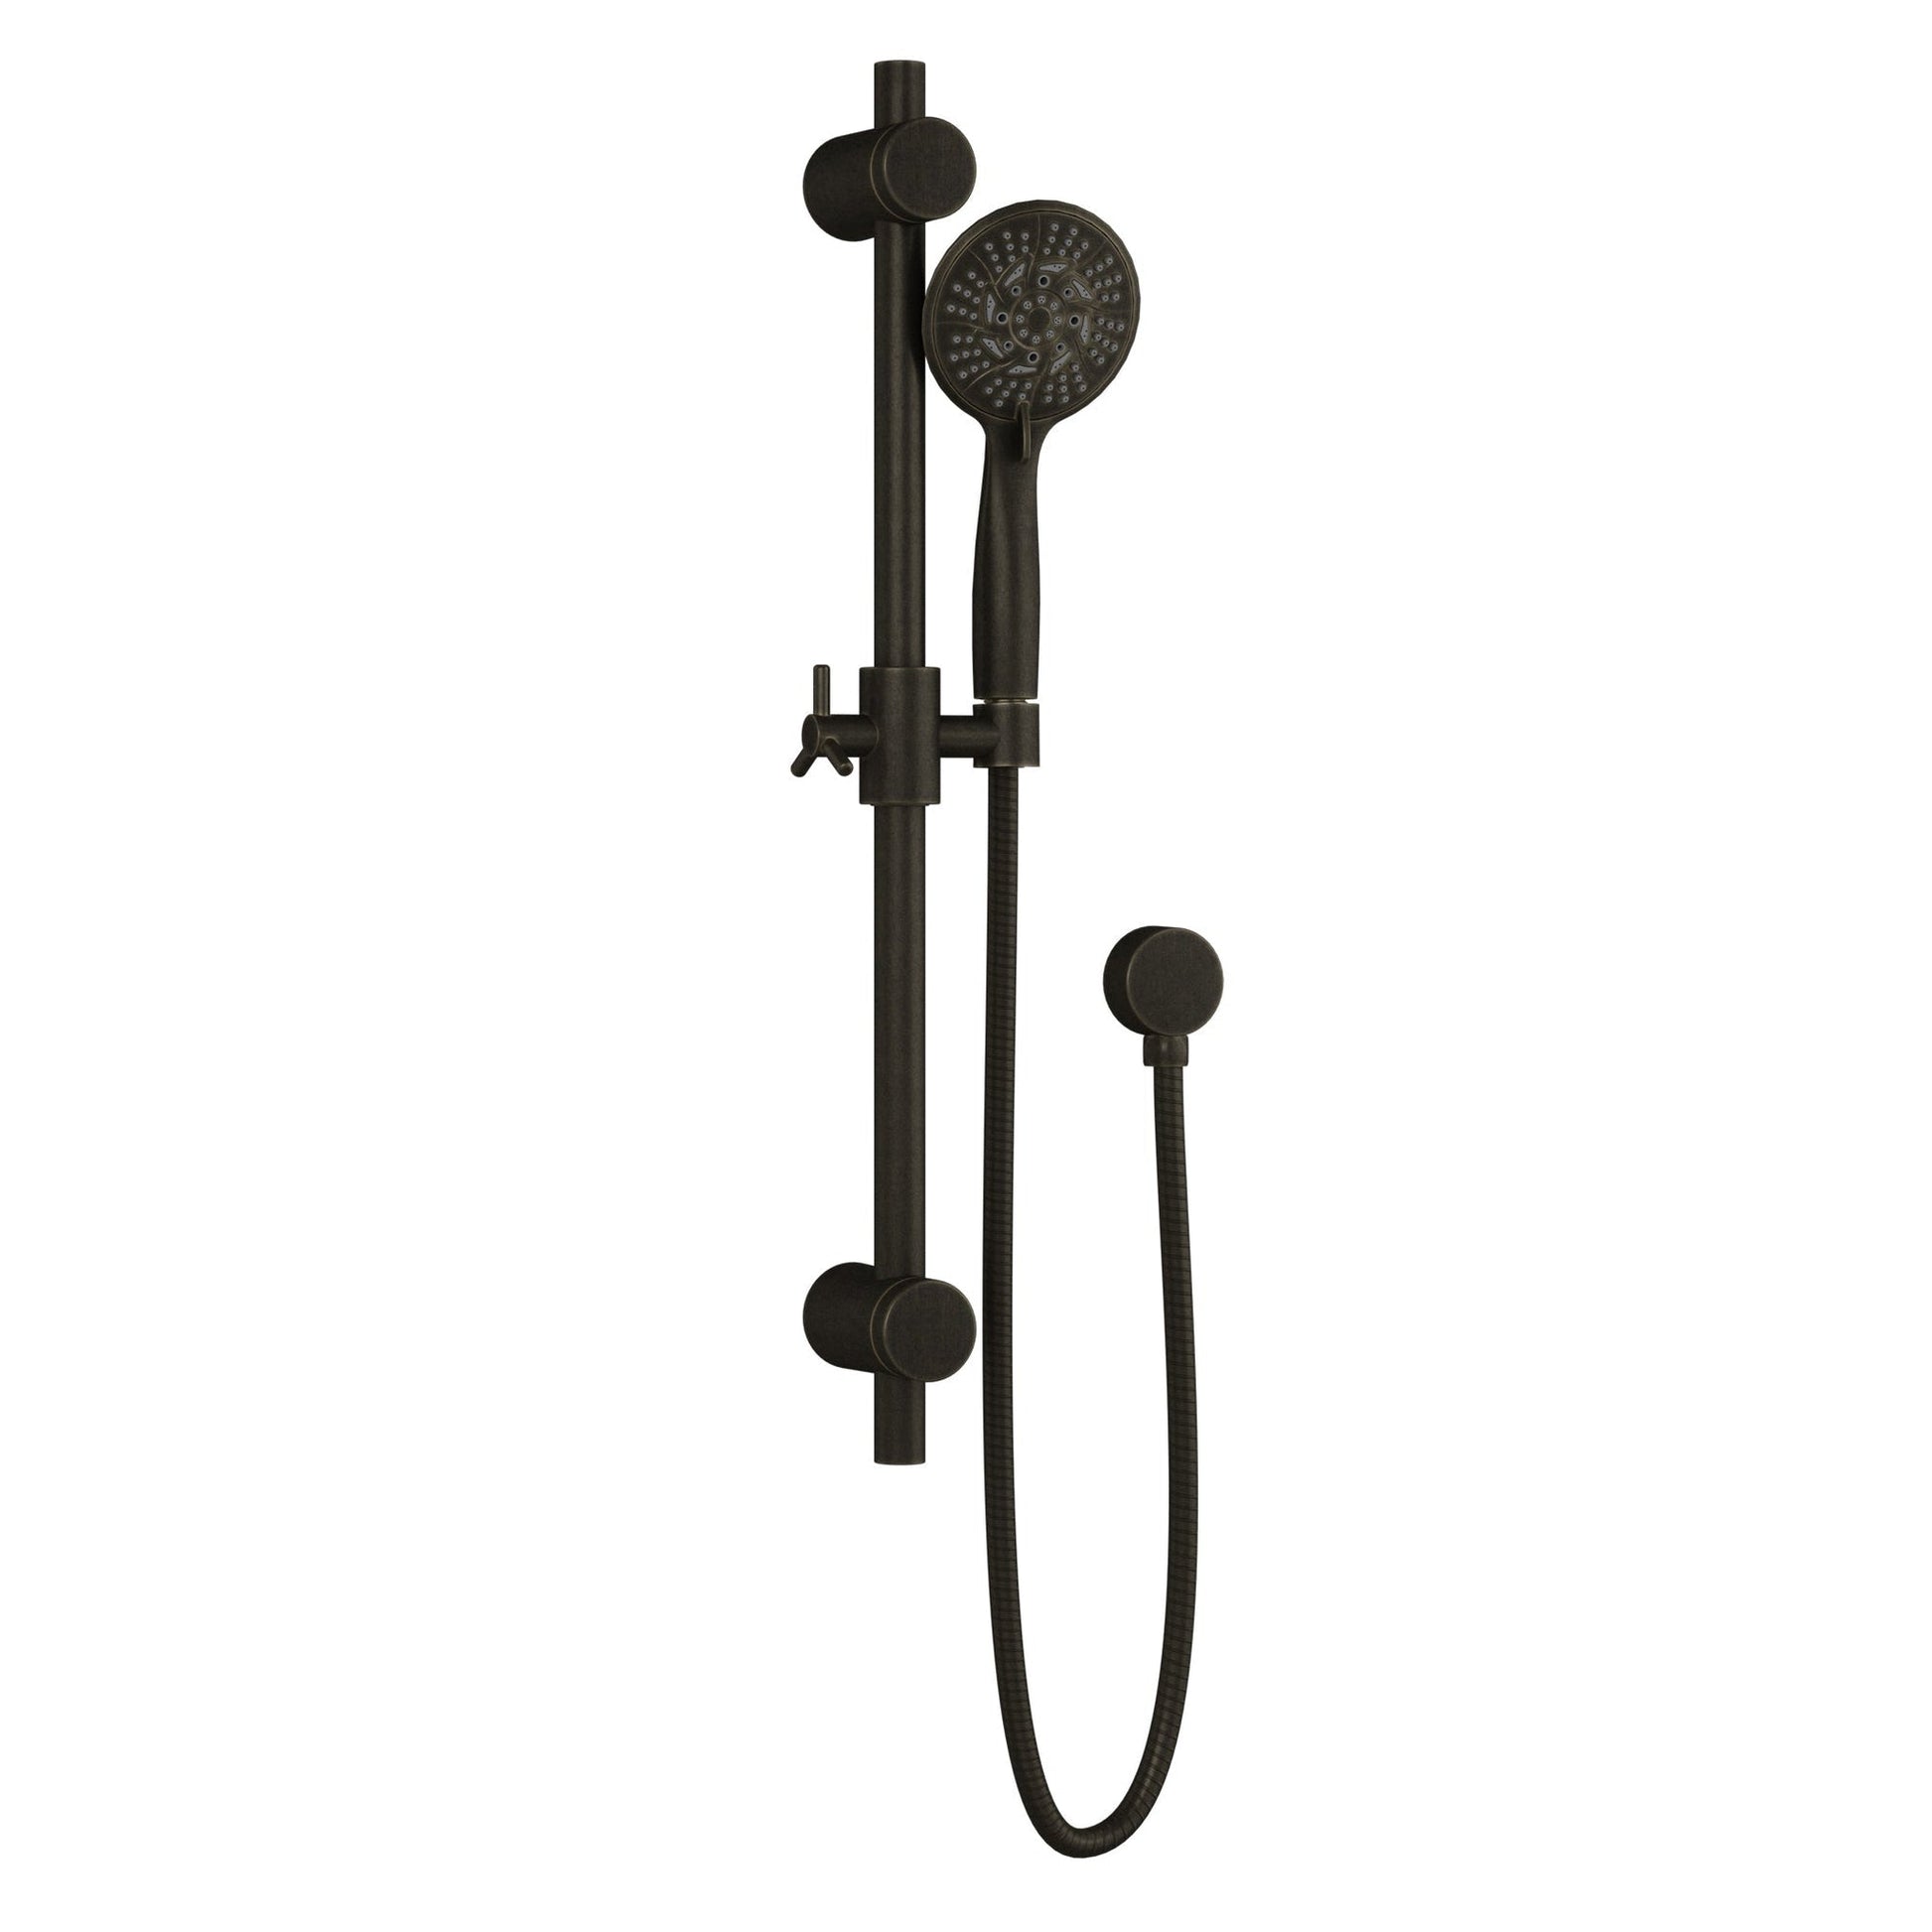 PULSE ShowerSpas Refuge Rain Shower Head 5-Function Hand Shower 1.8 GPM Shower System Combo in Oil Rubbed Bronze Finish